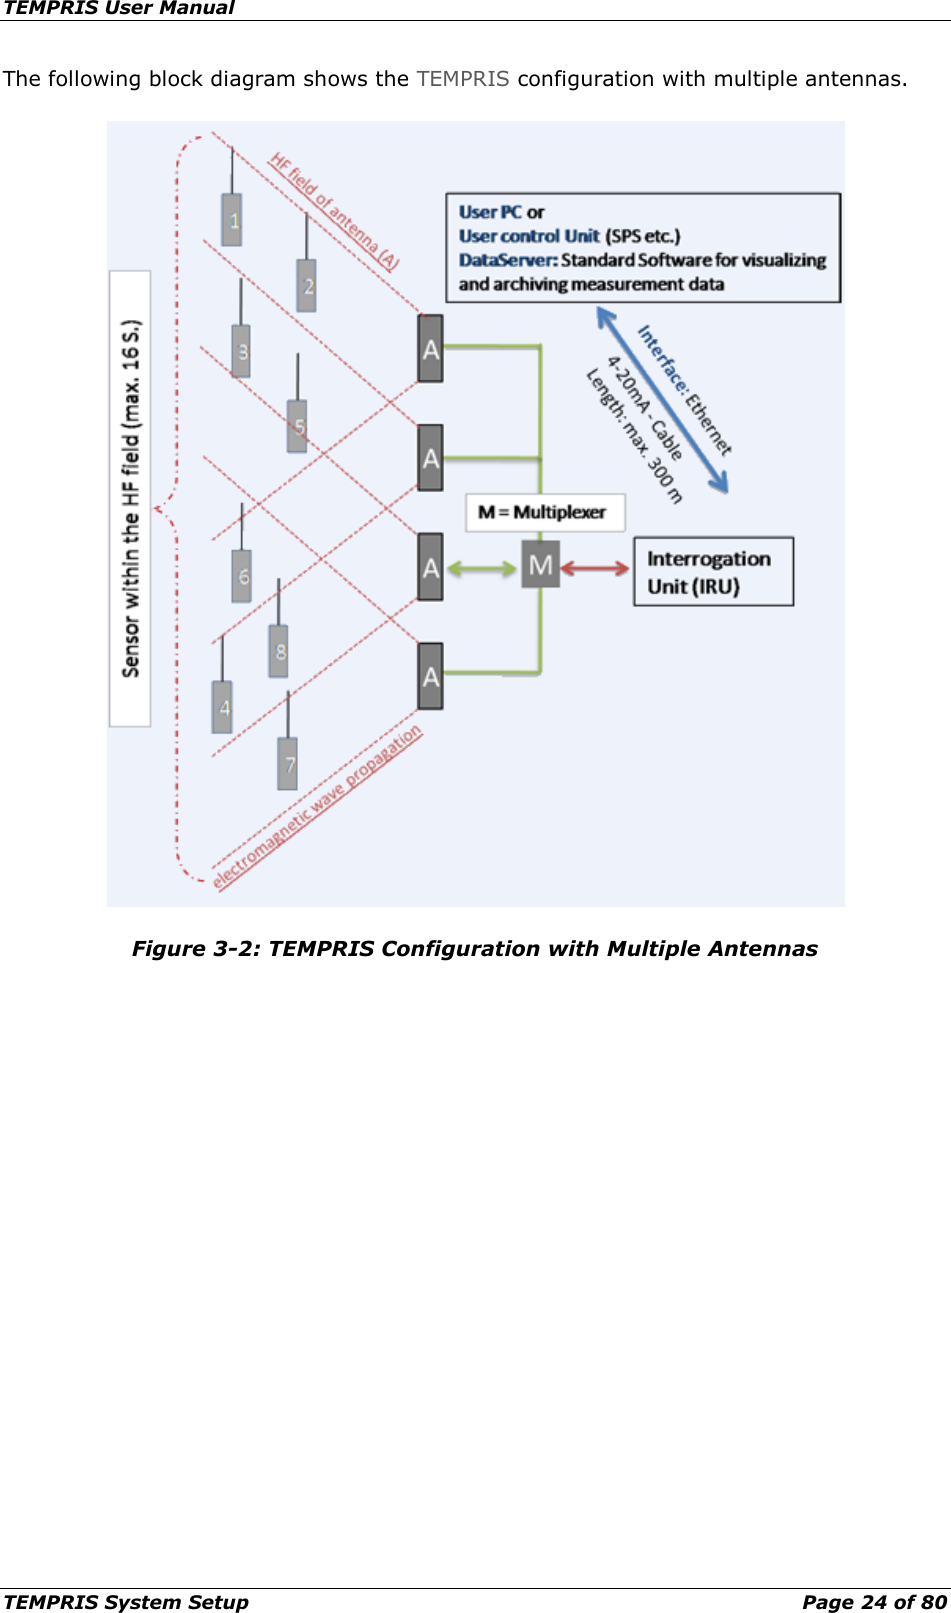 TEMPRIS User Manual TEMPRIS System Setup    Page 24 of 80 The following block diagram shows the TEMPRIS configuration with multiple antennas.  Figure 3-2: TEMPRIS Configuration with Multiple Antennas     